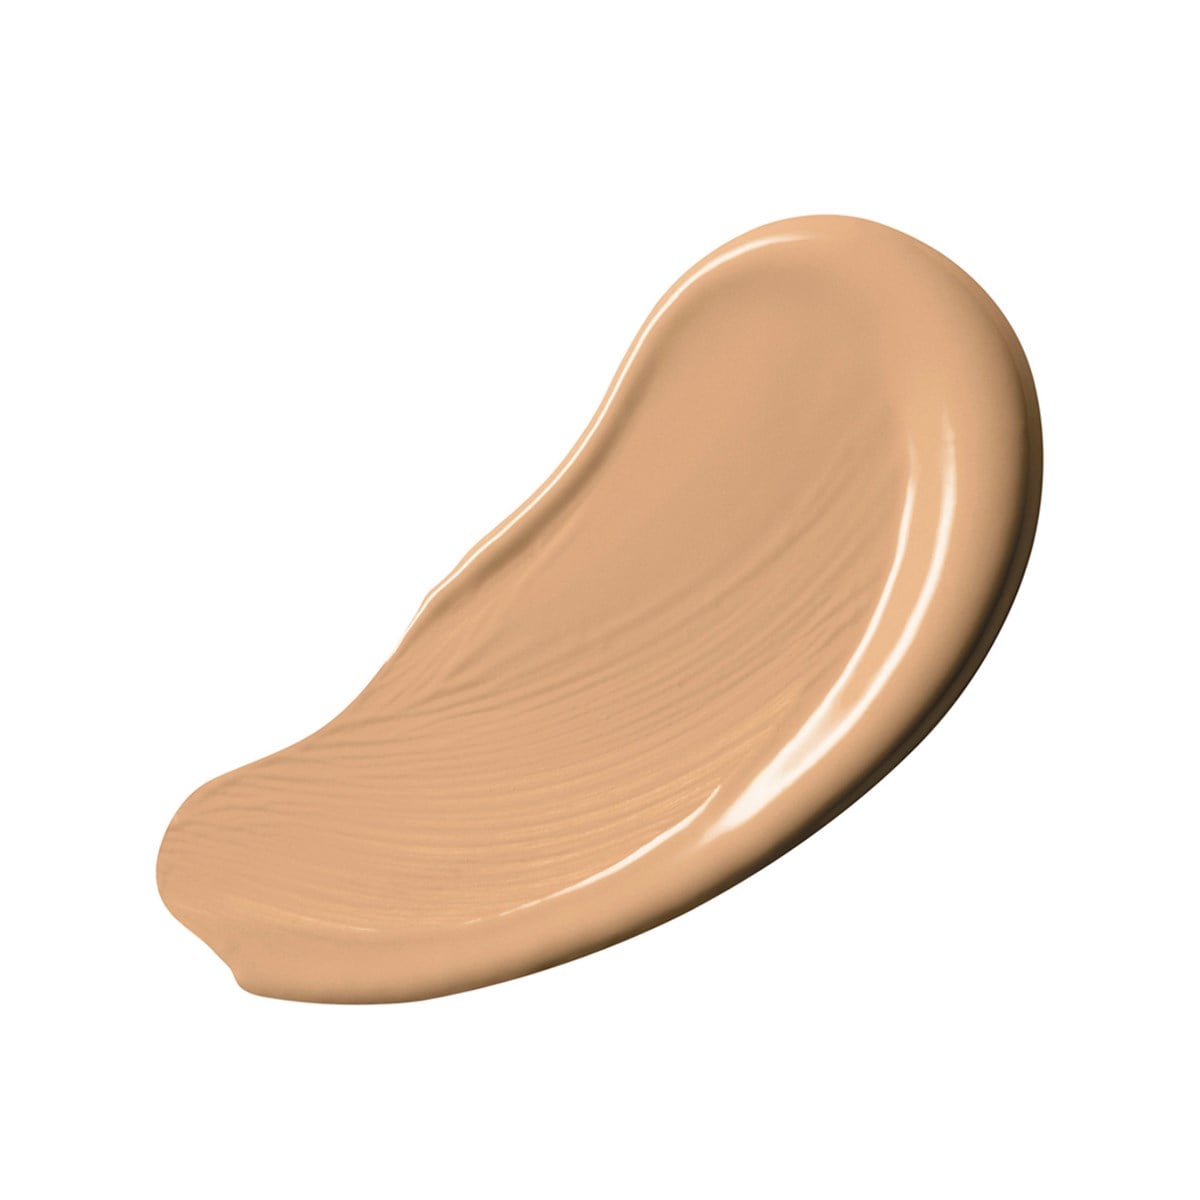 Boi-ing Cakeless Concealer Full coverage liquid concealer by Benefit